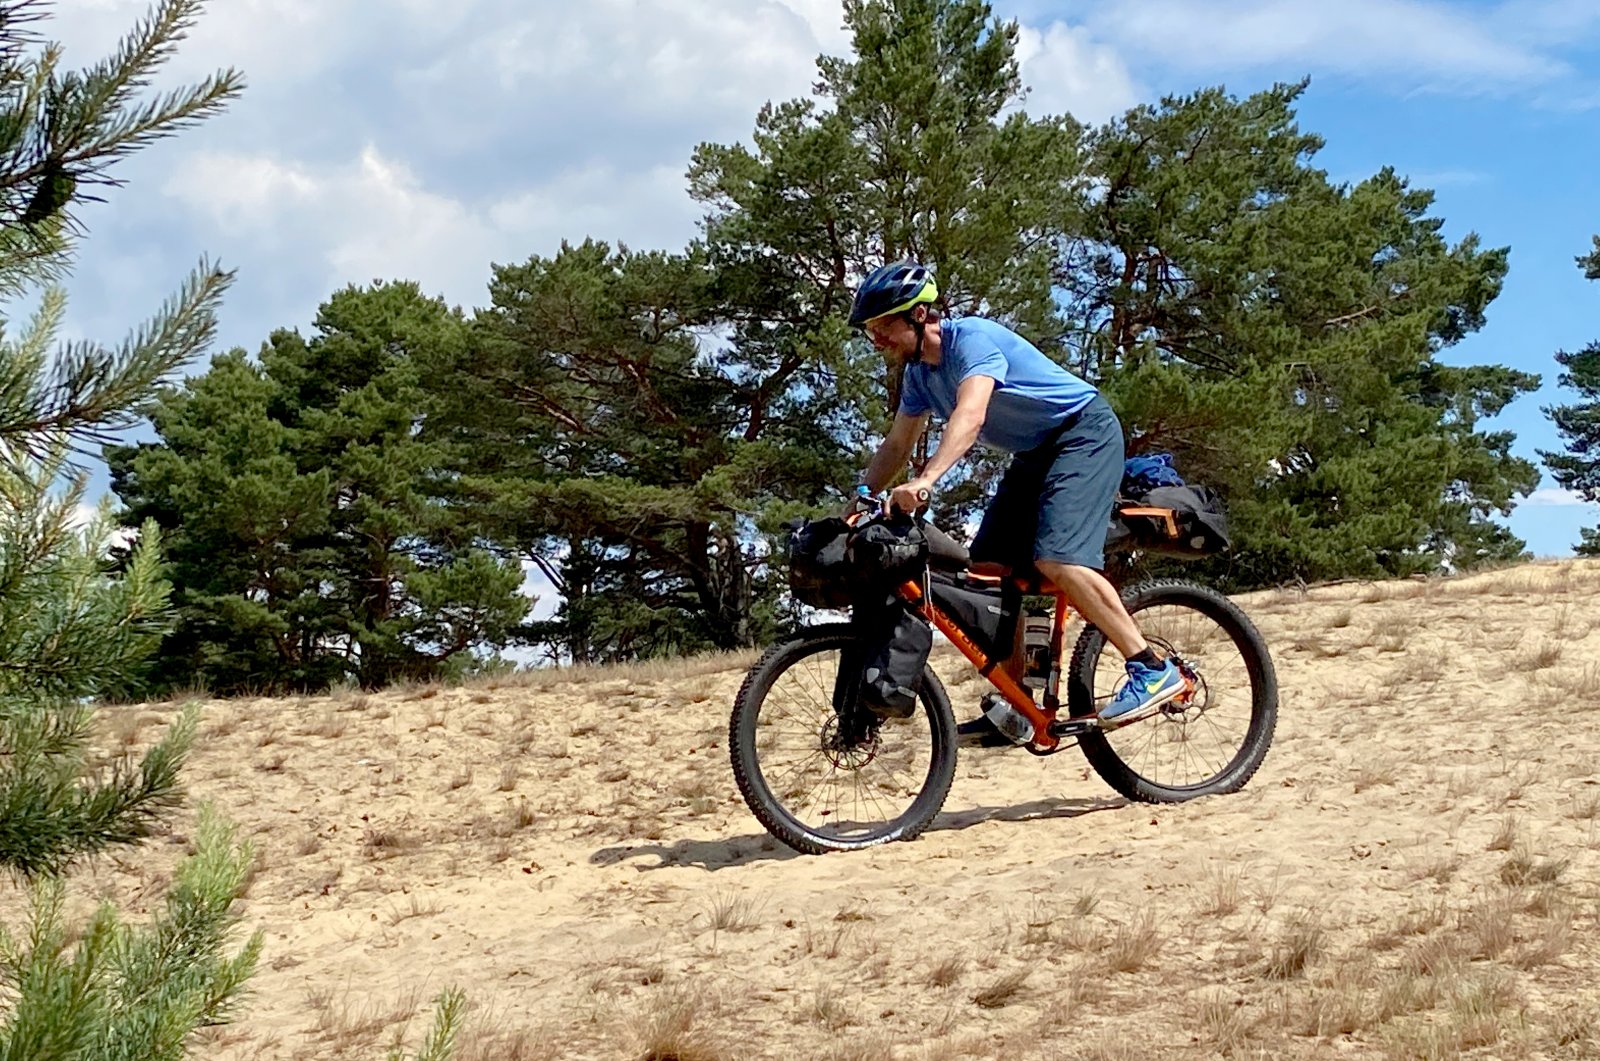 Thanks to its wide tread tires, this bikepacking bike – similar to a mountain bike – masters difficult terrain like this sandhill far better than a trekking bike with narrower tires. (DPA Photo)